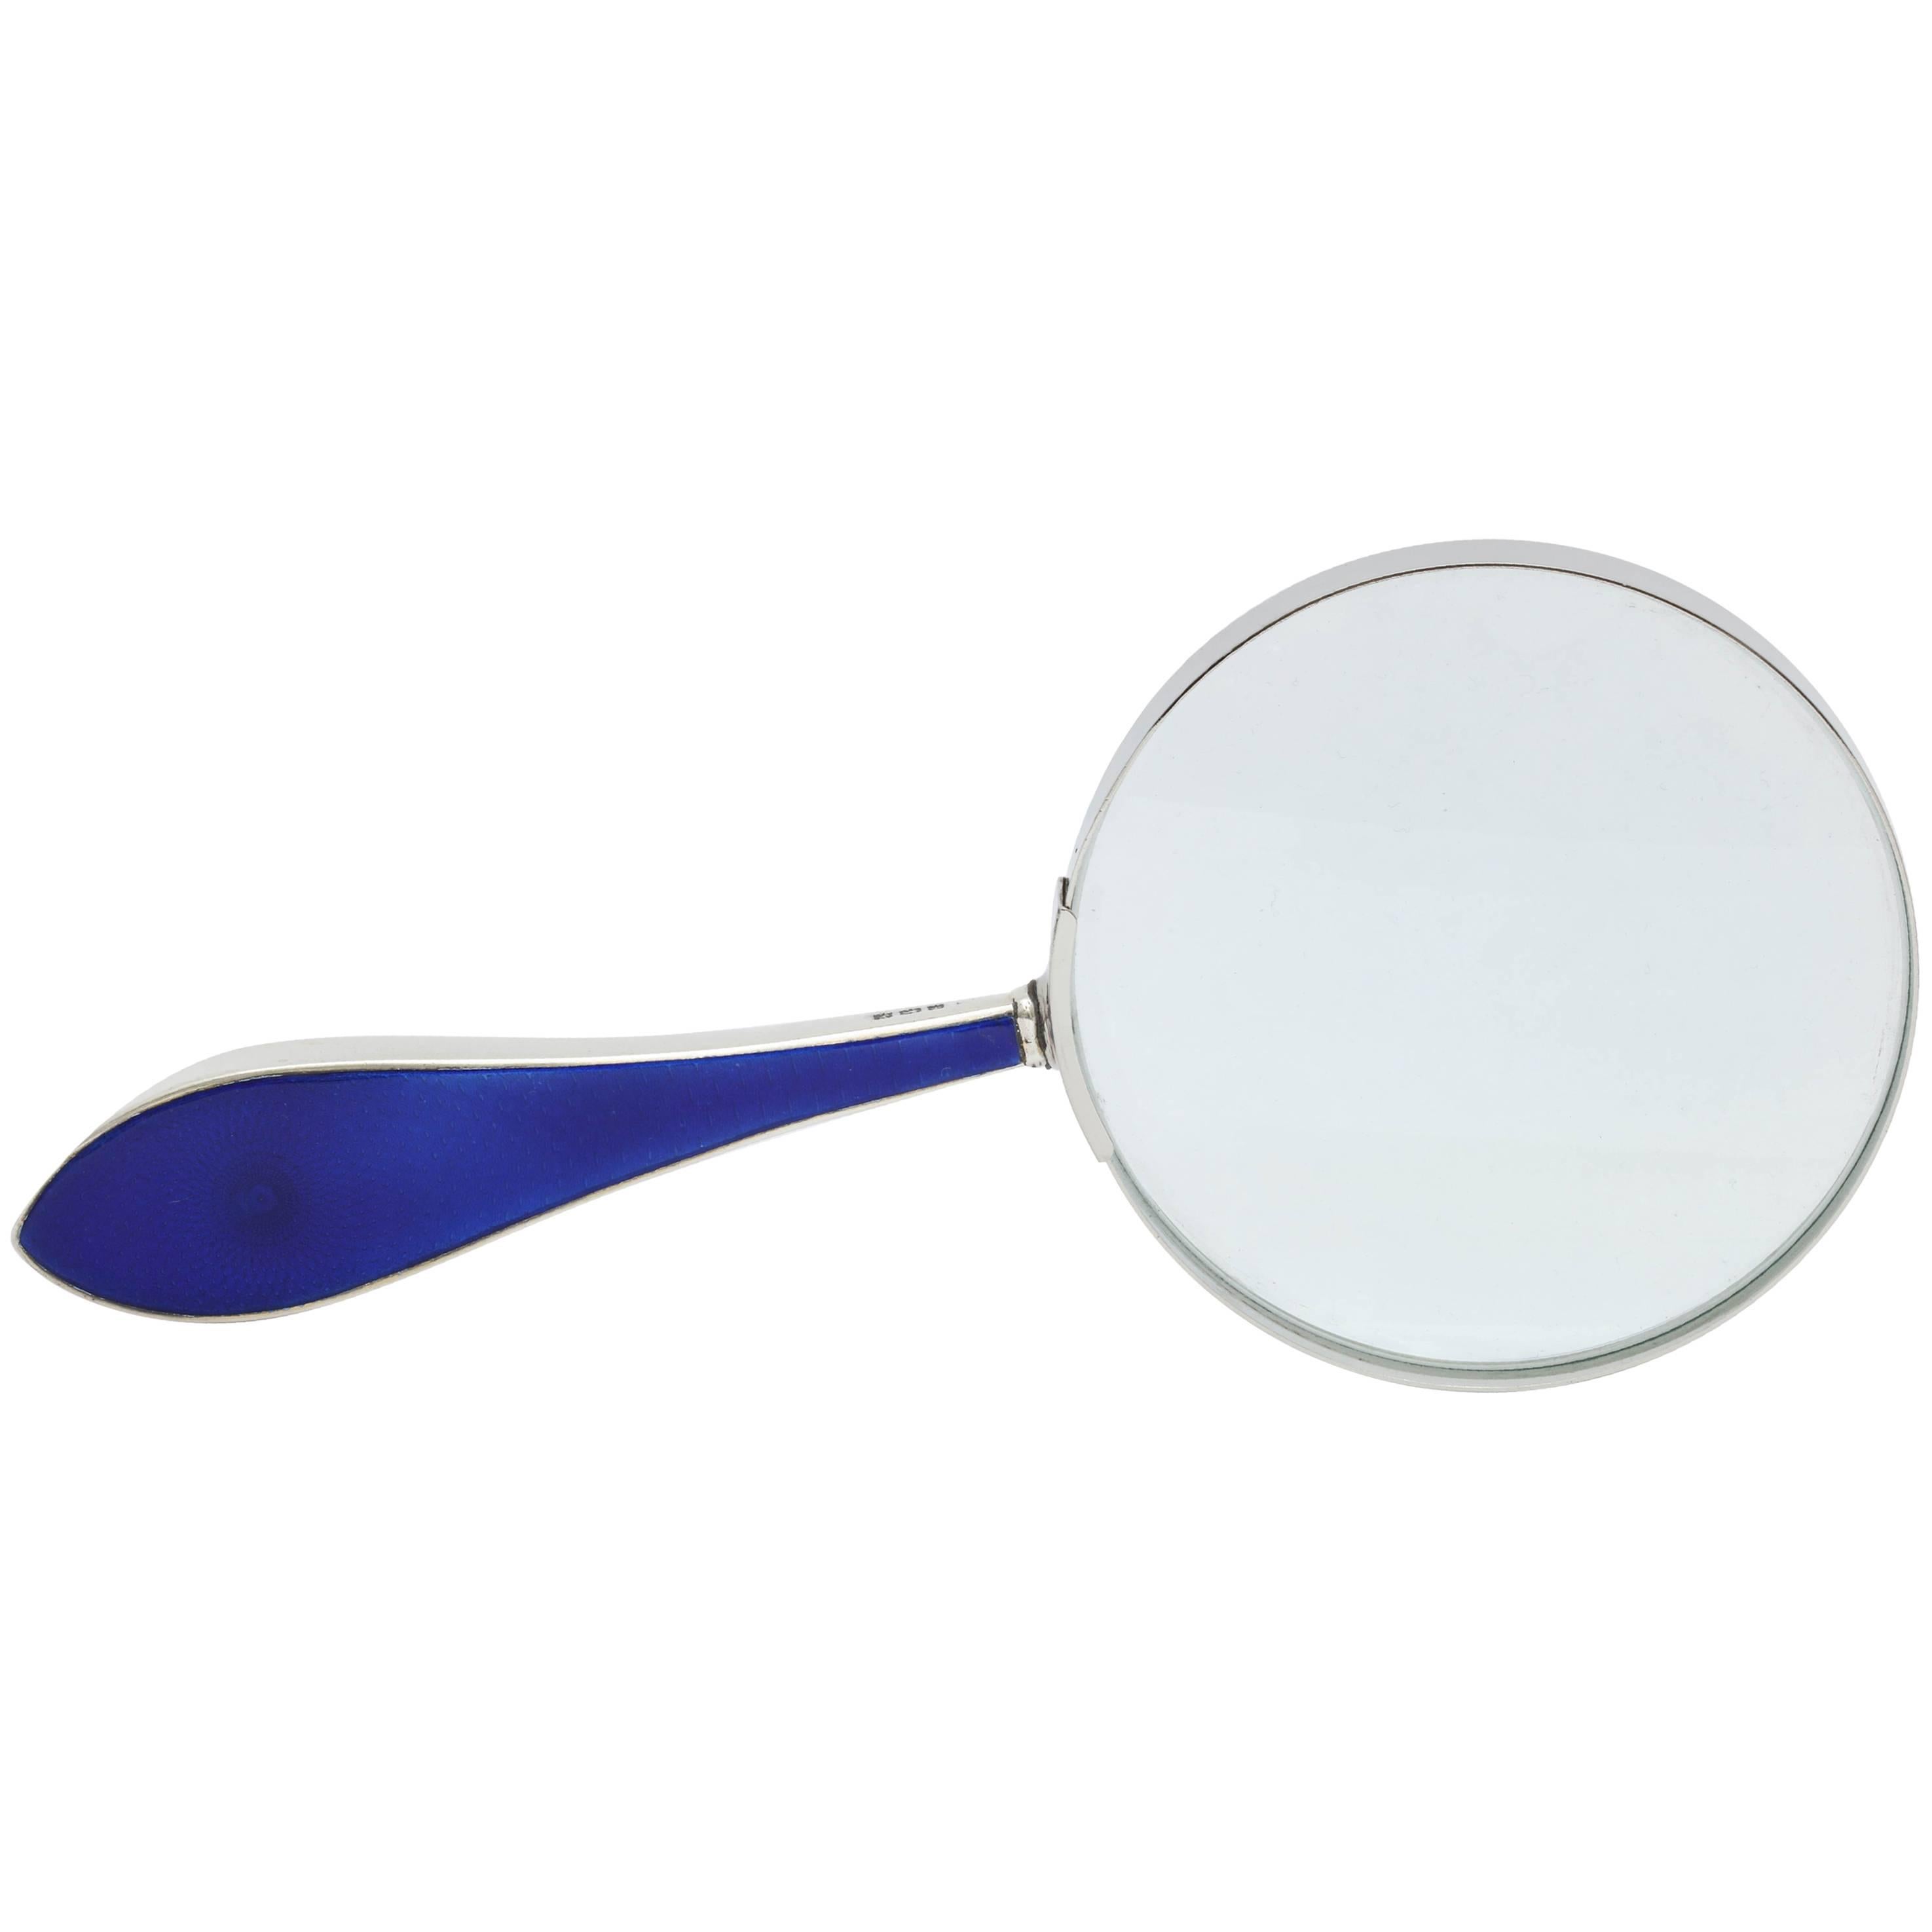 Art Deco Sterling Silver-Mounted Cobalt Blue Guilloche Enamel Magnifying Glass